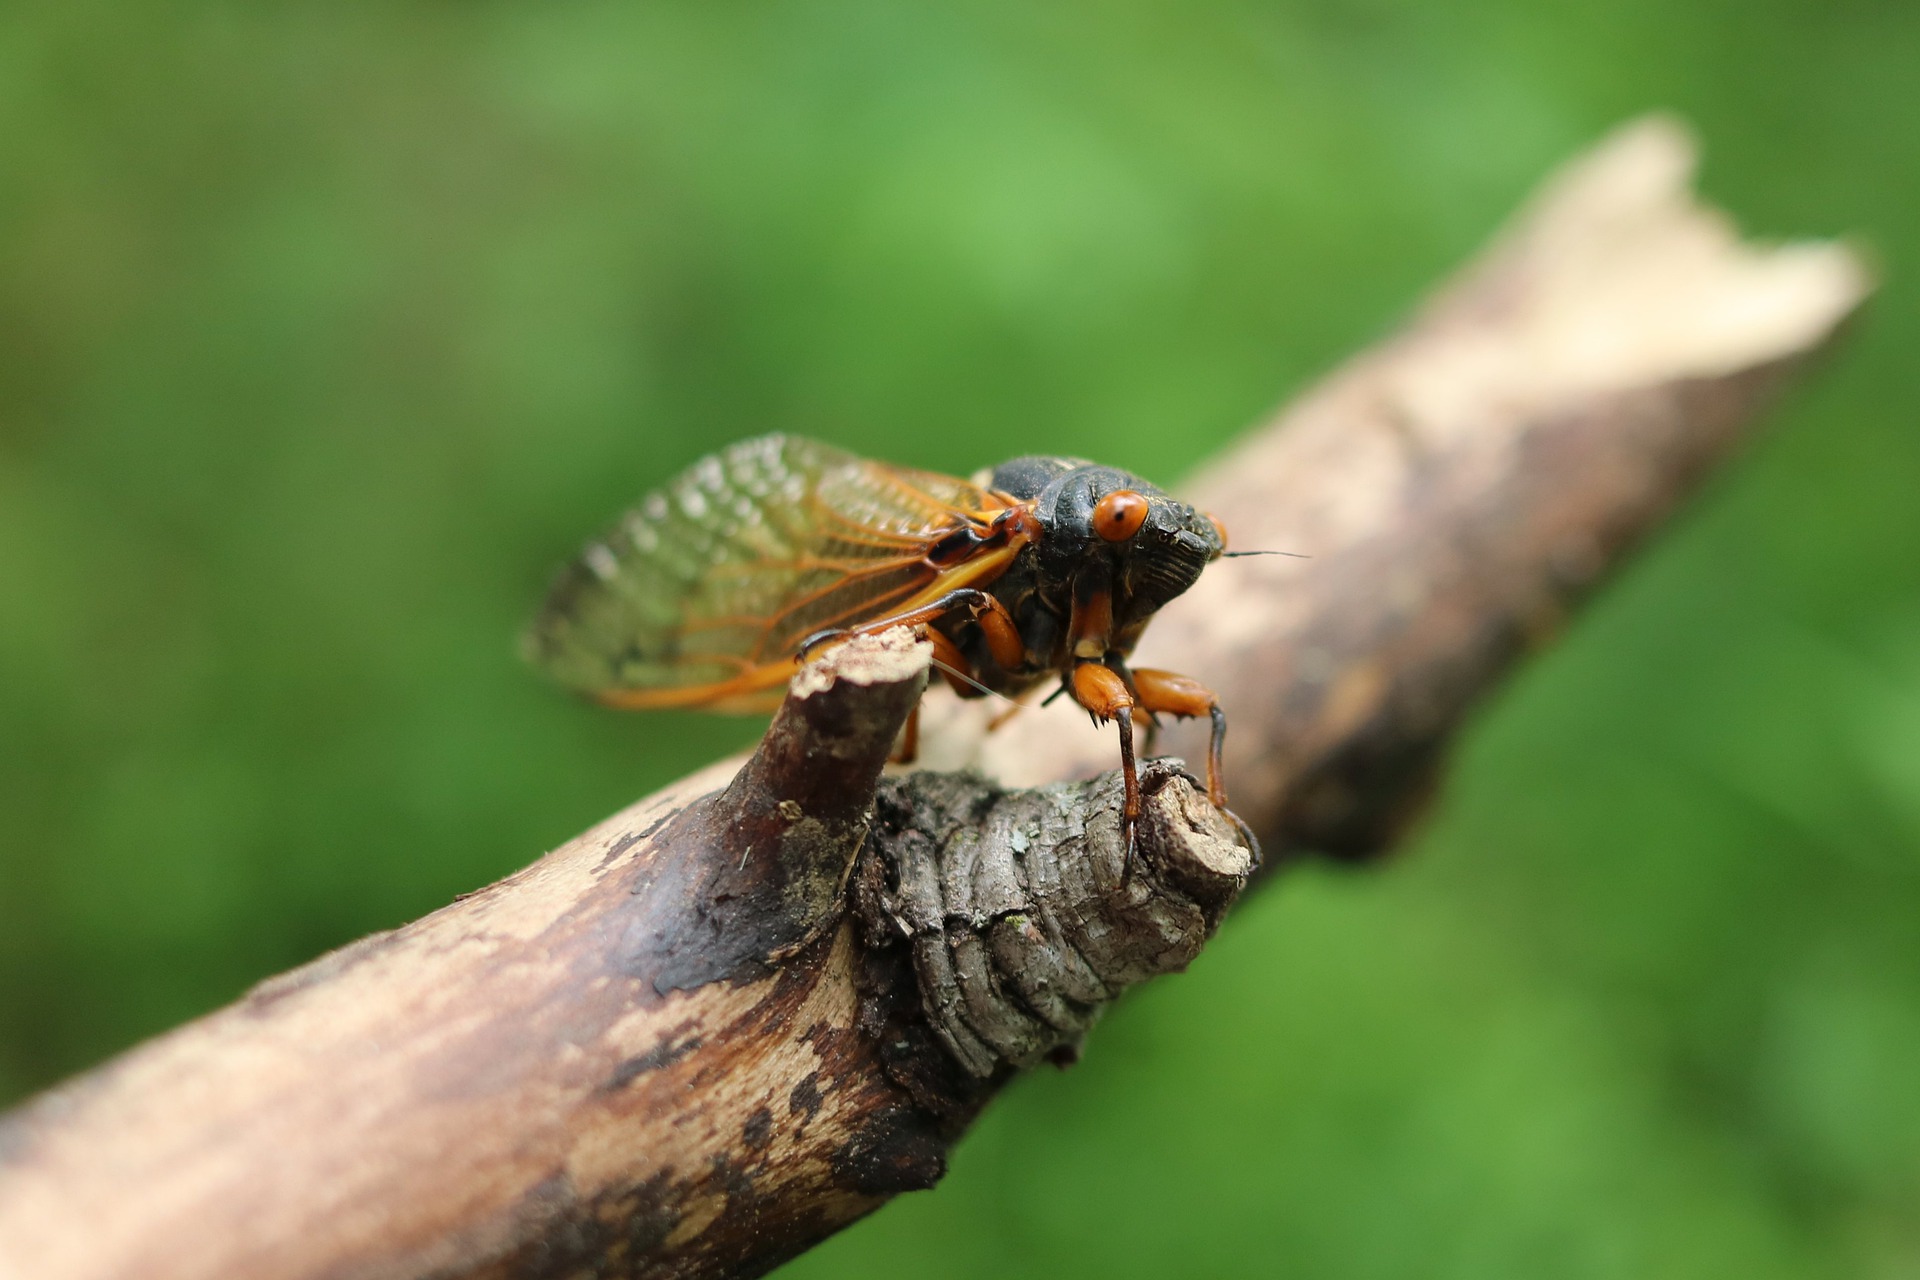 Baby Brood X cicadas are headed underground. What lies ahead is still a mystery.